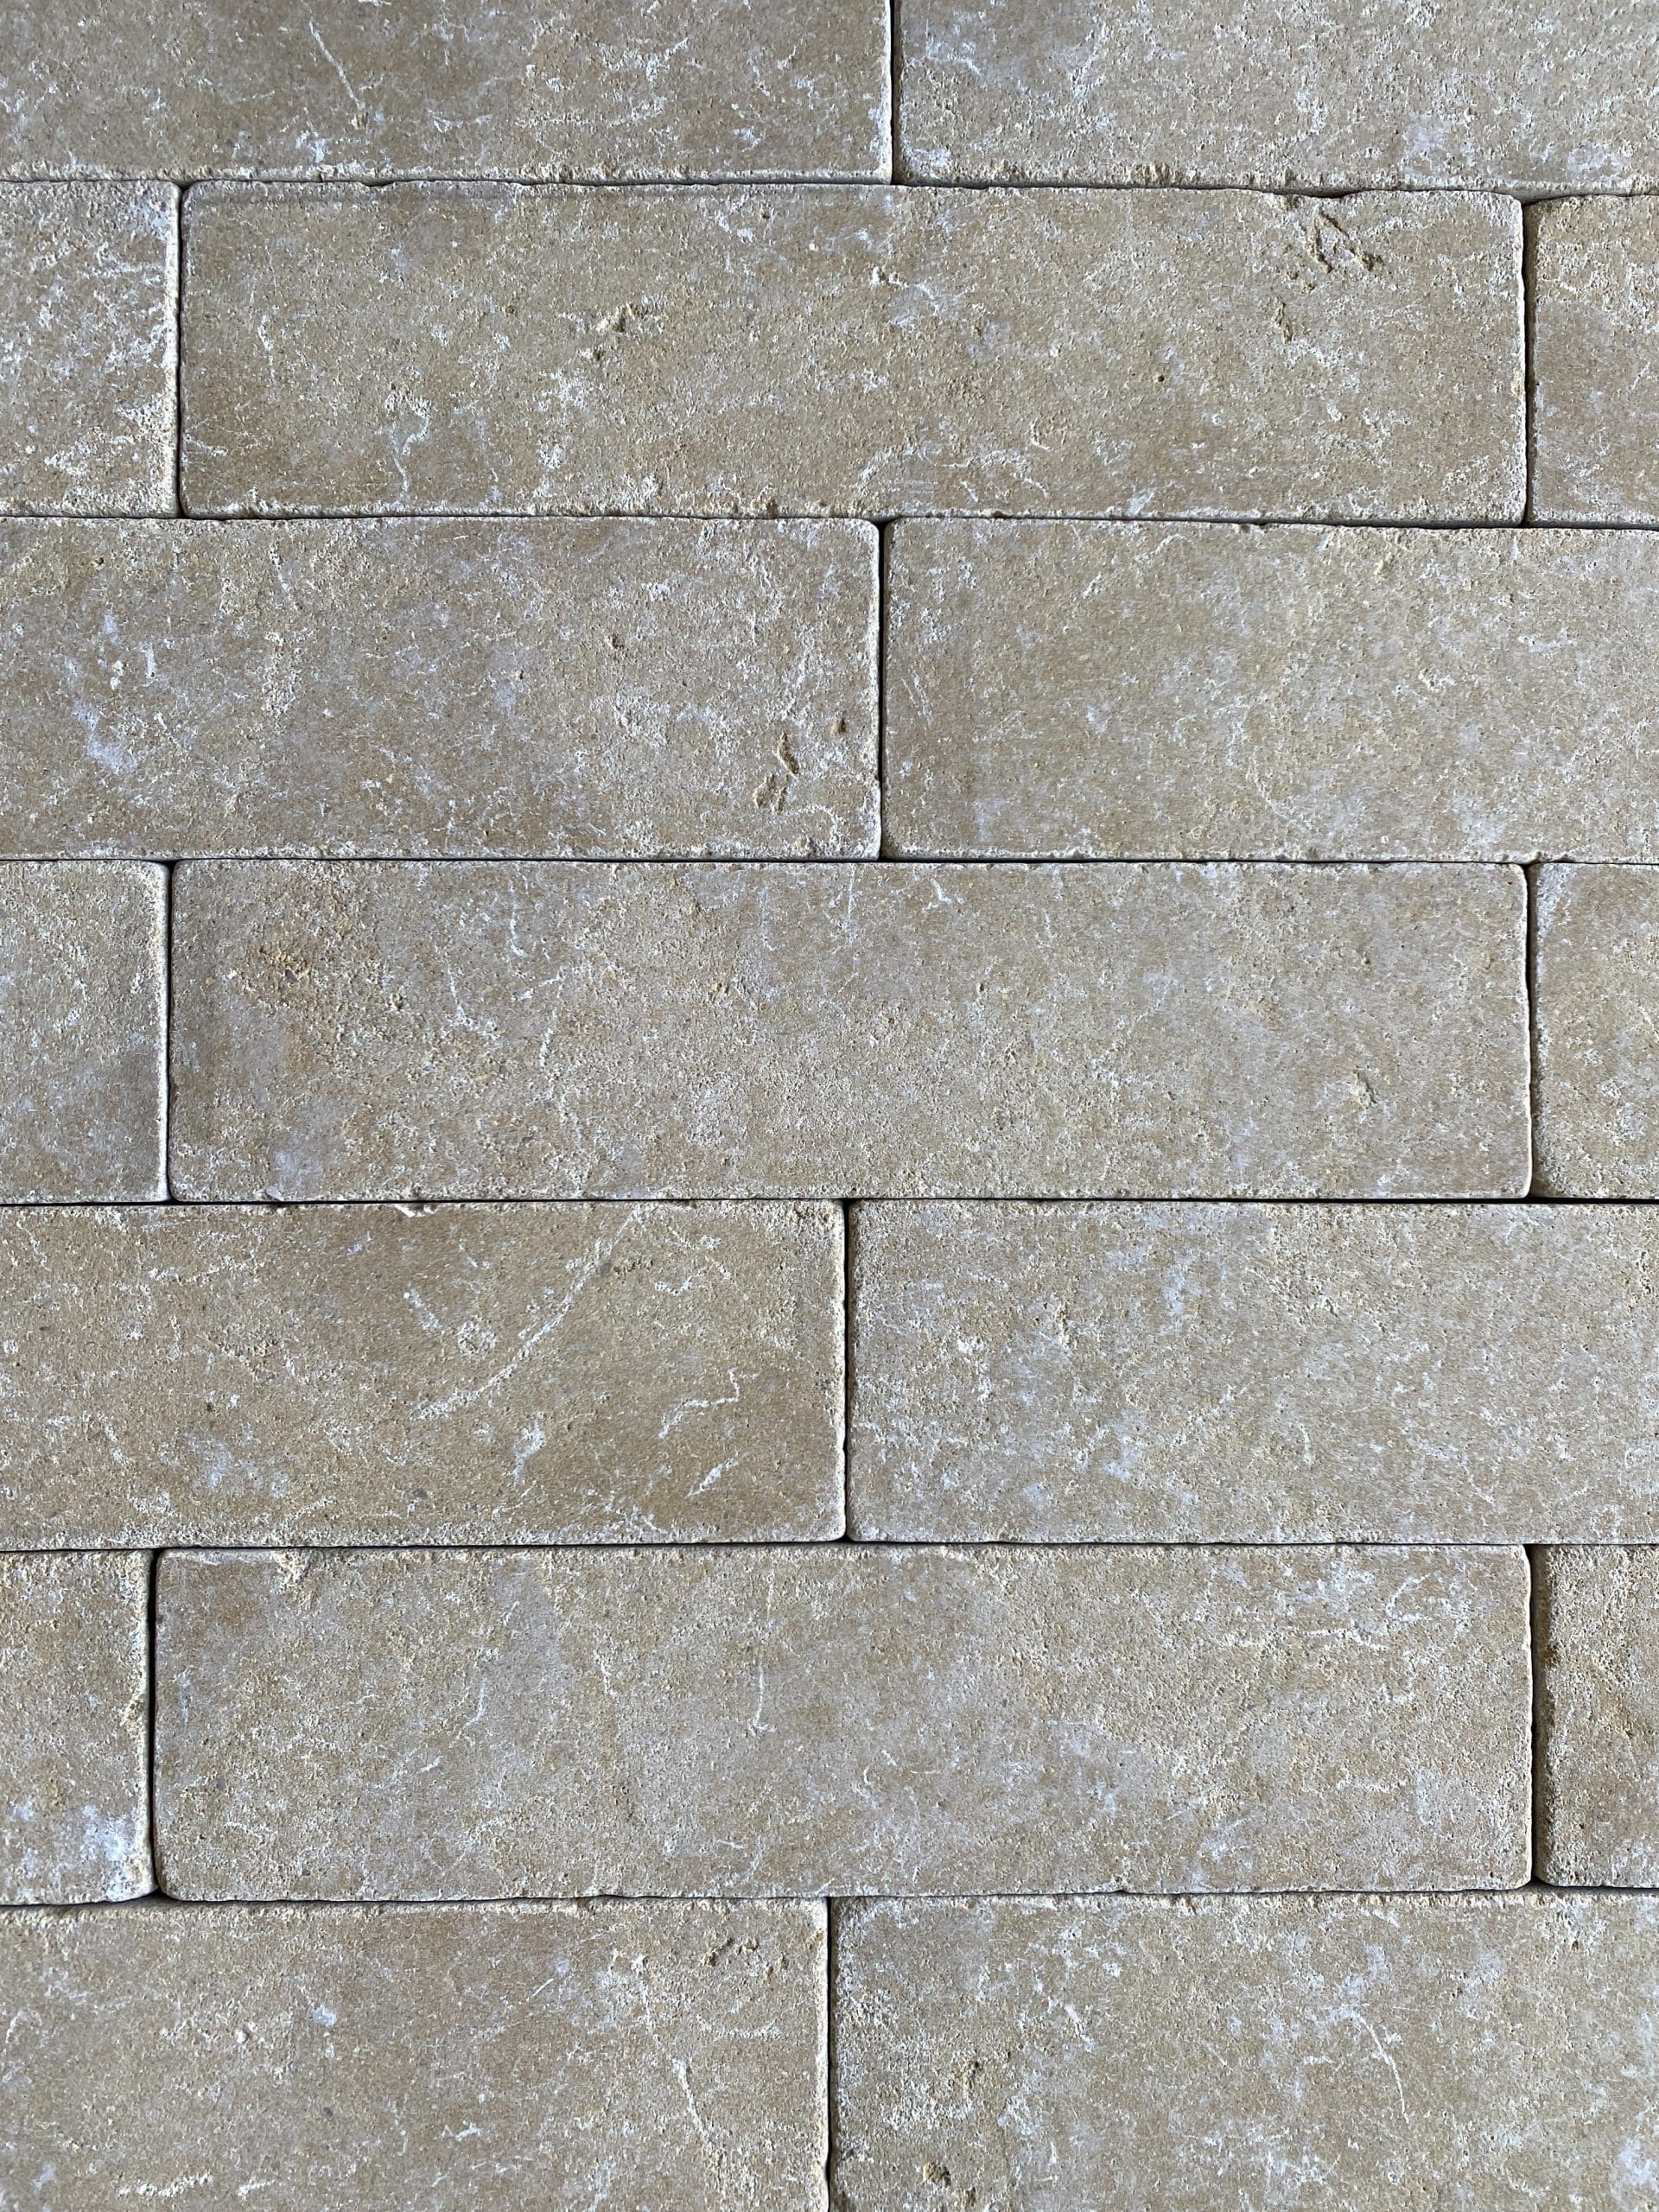 NICE BRUSHED & TUMBLED LIMESTONE BATTONS_RMS TRADERS_NATURAL STONE PAVER SUPPLIER MELBOURNE (12)